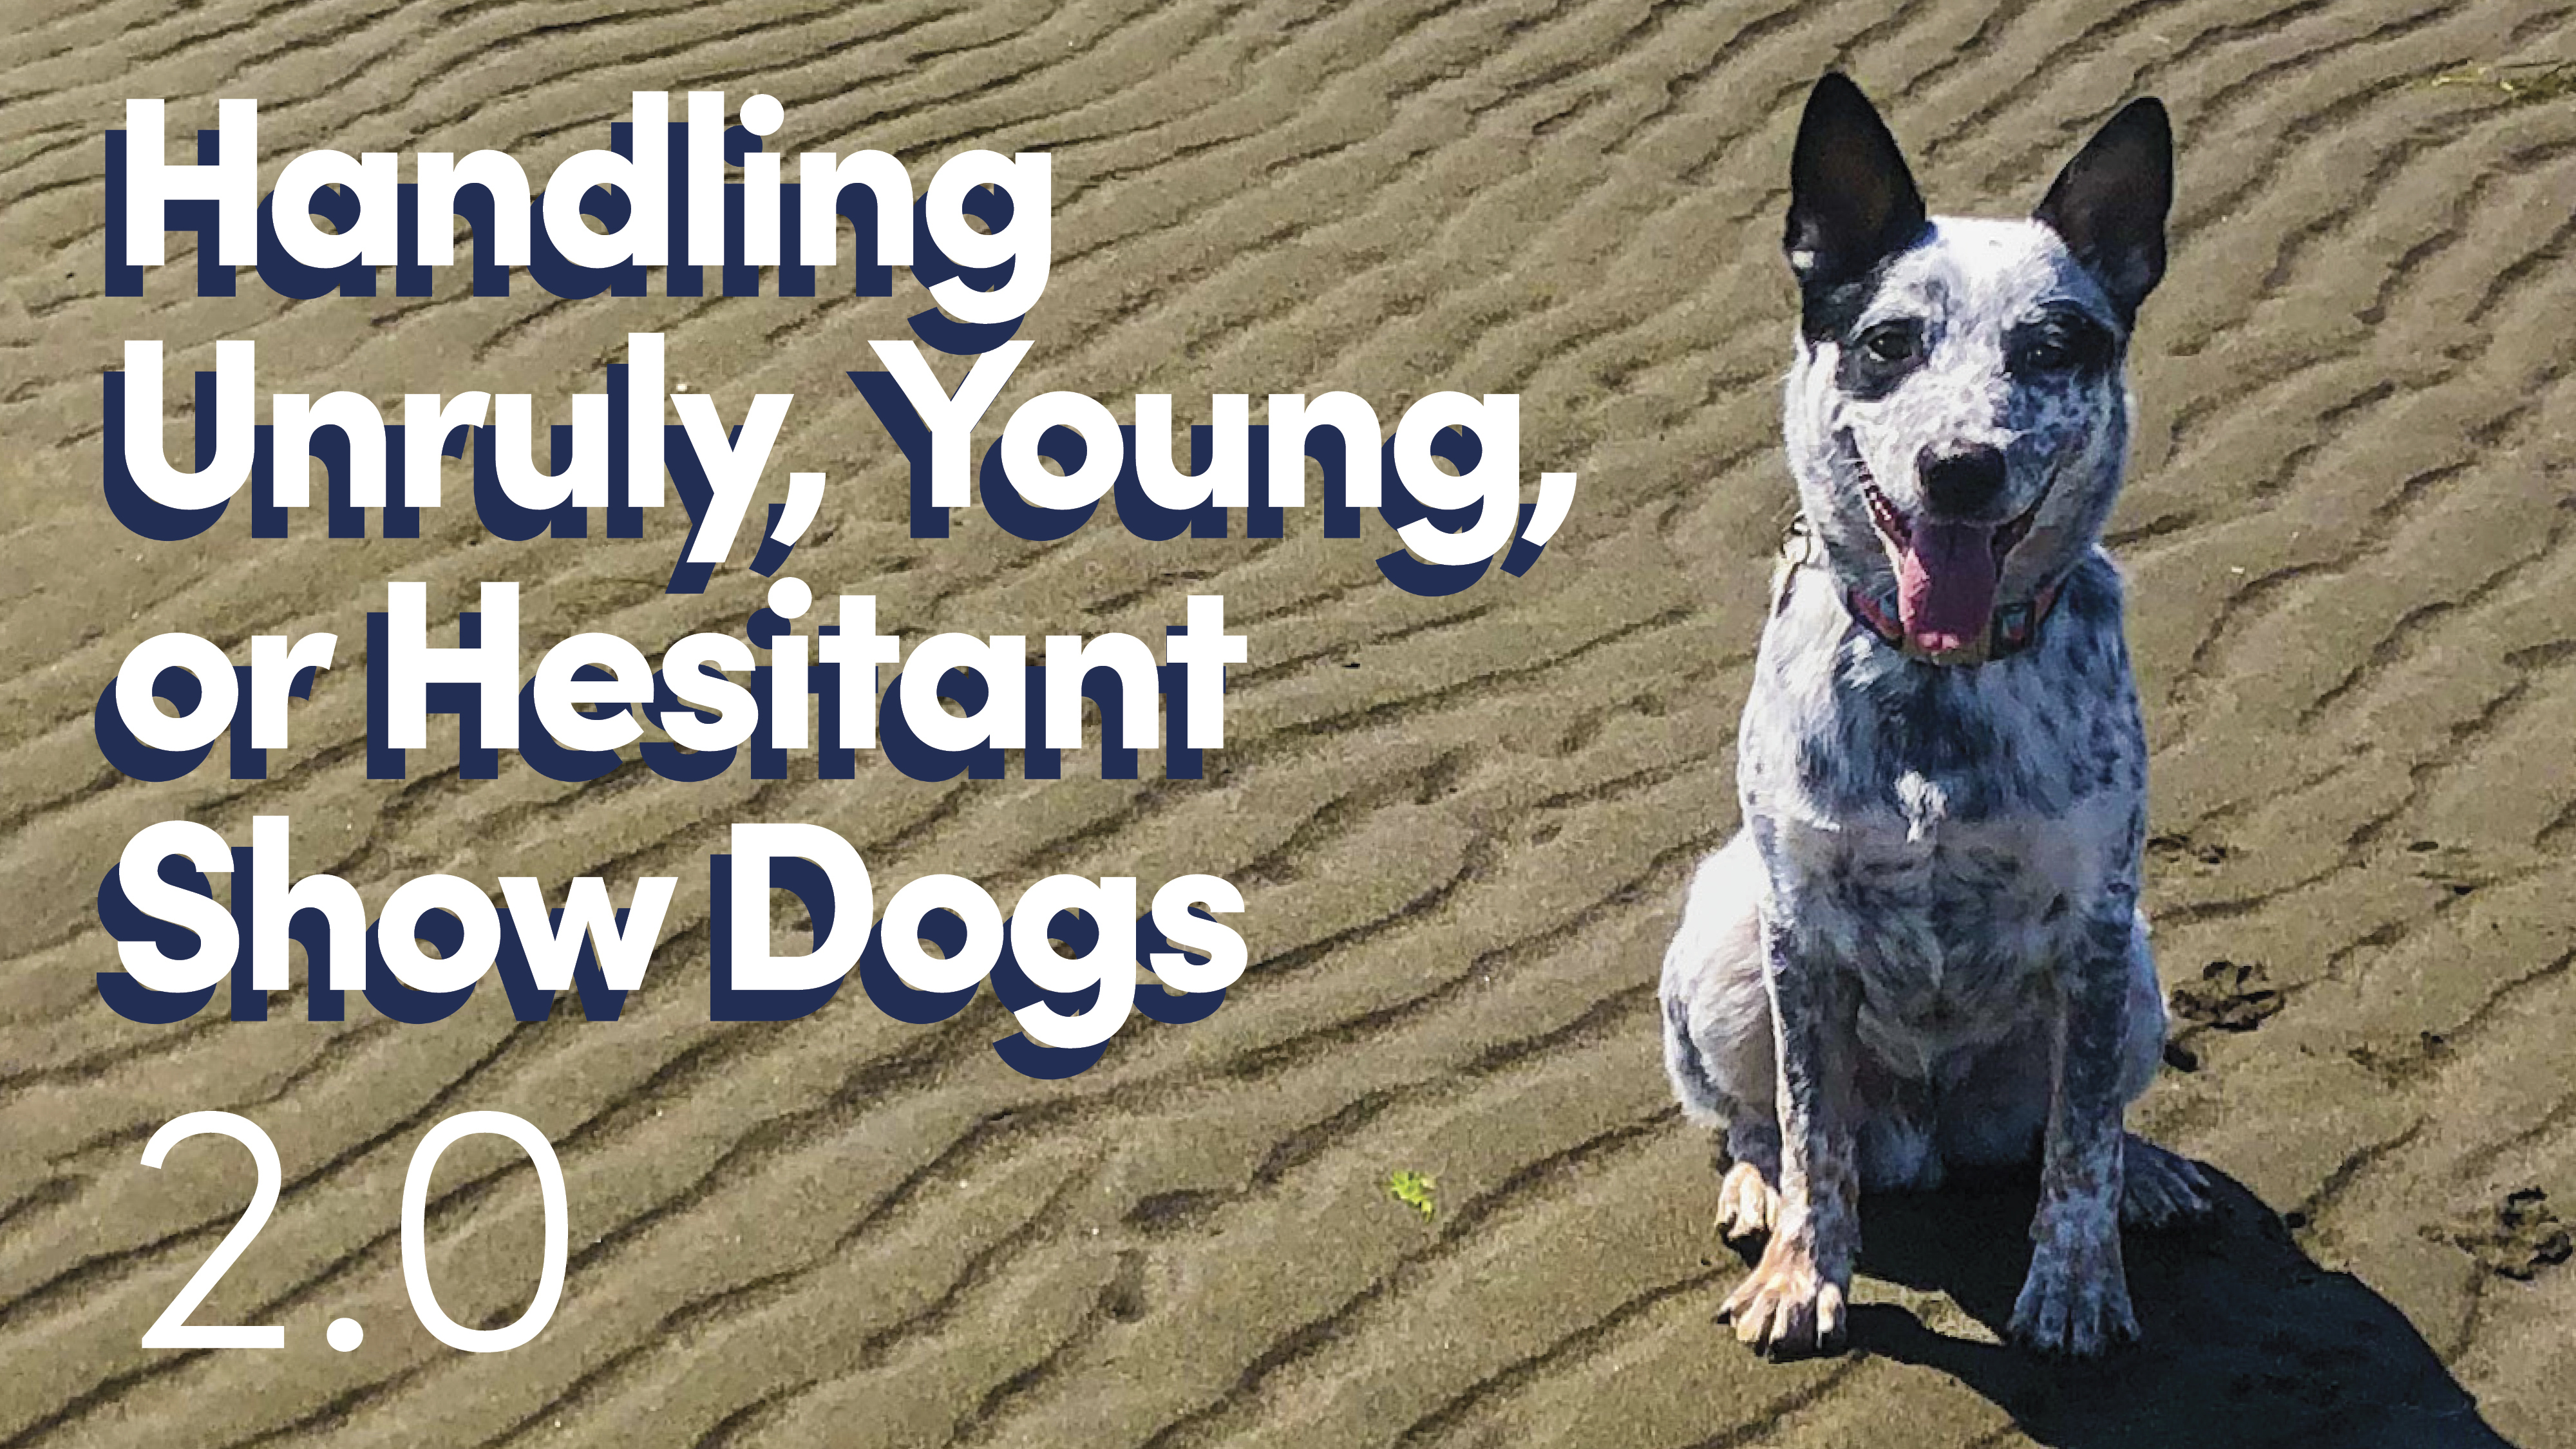 An Australian Cattle Dog on the beach with the caption Handling Unruly, Young or Hesitant Show Dogs 2.0